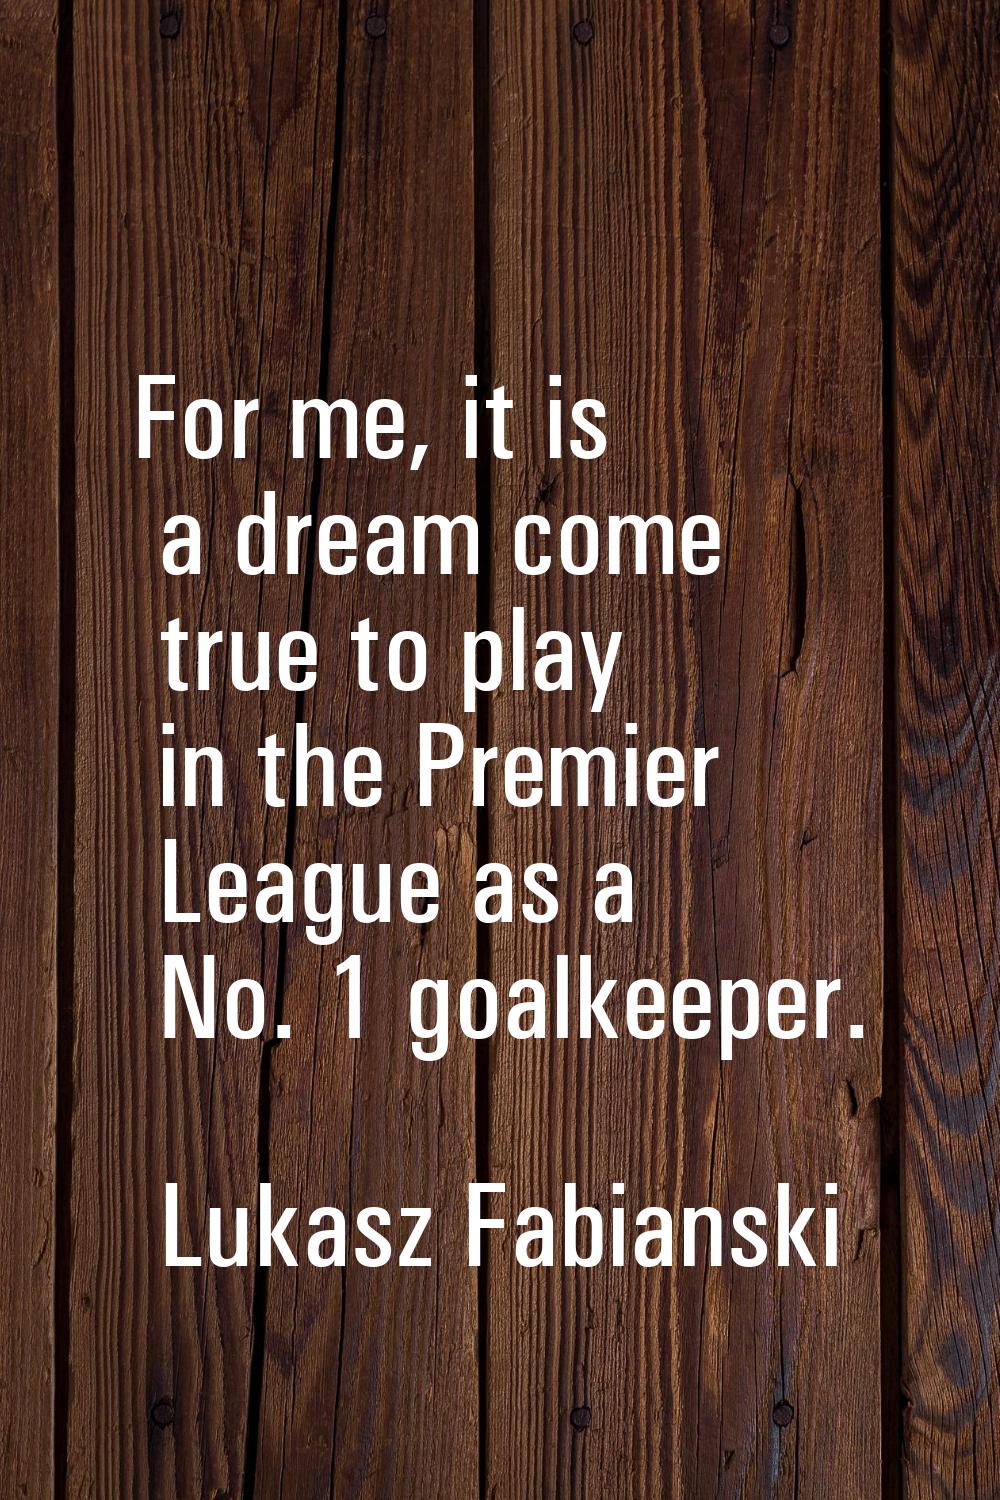 For me, it is a dream come true to play in the Premier League as a No. 1 goalkeeper.